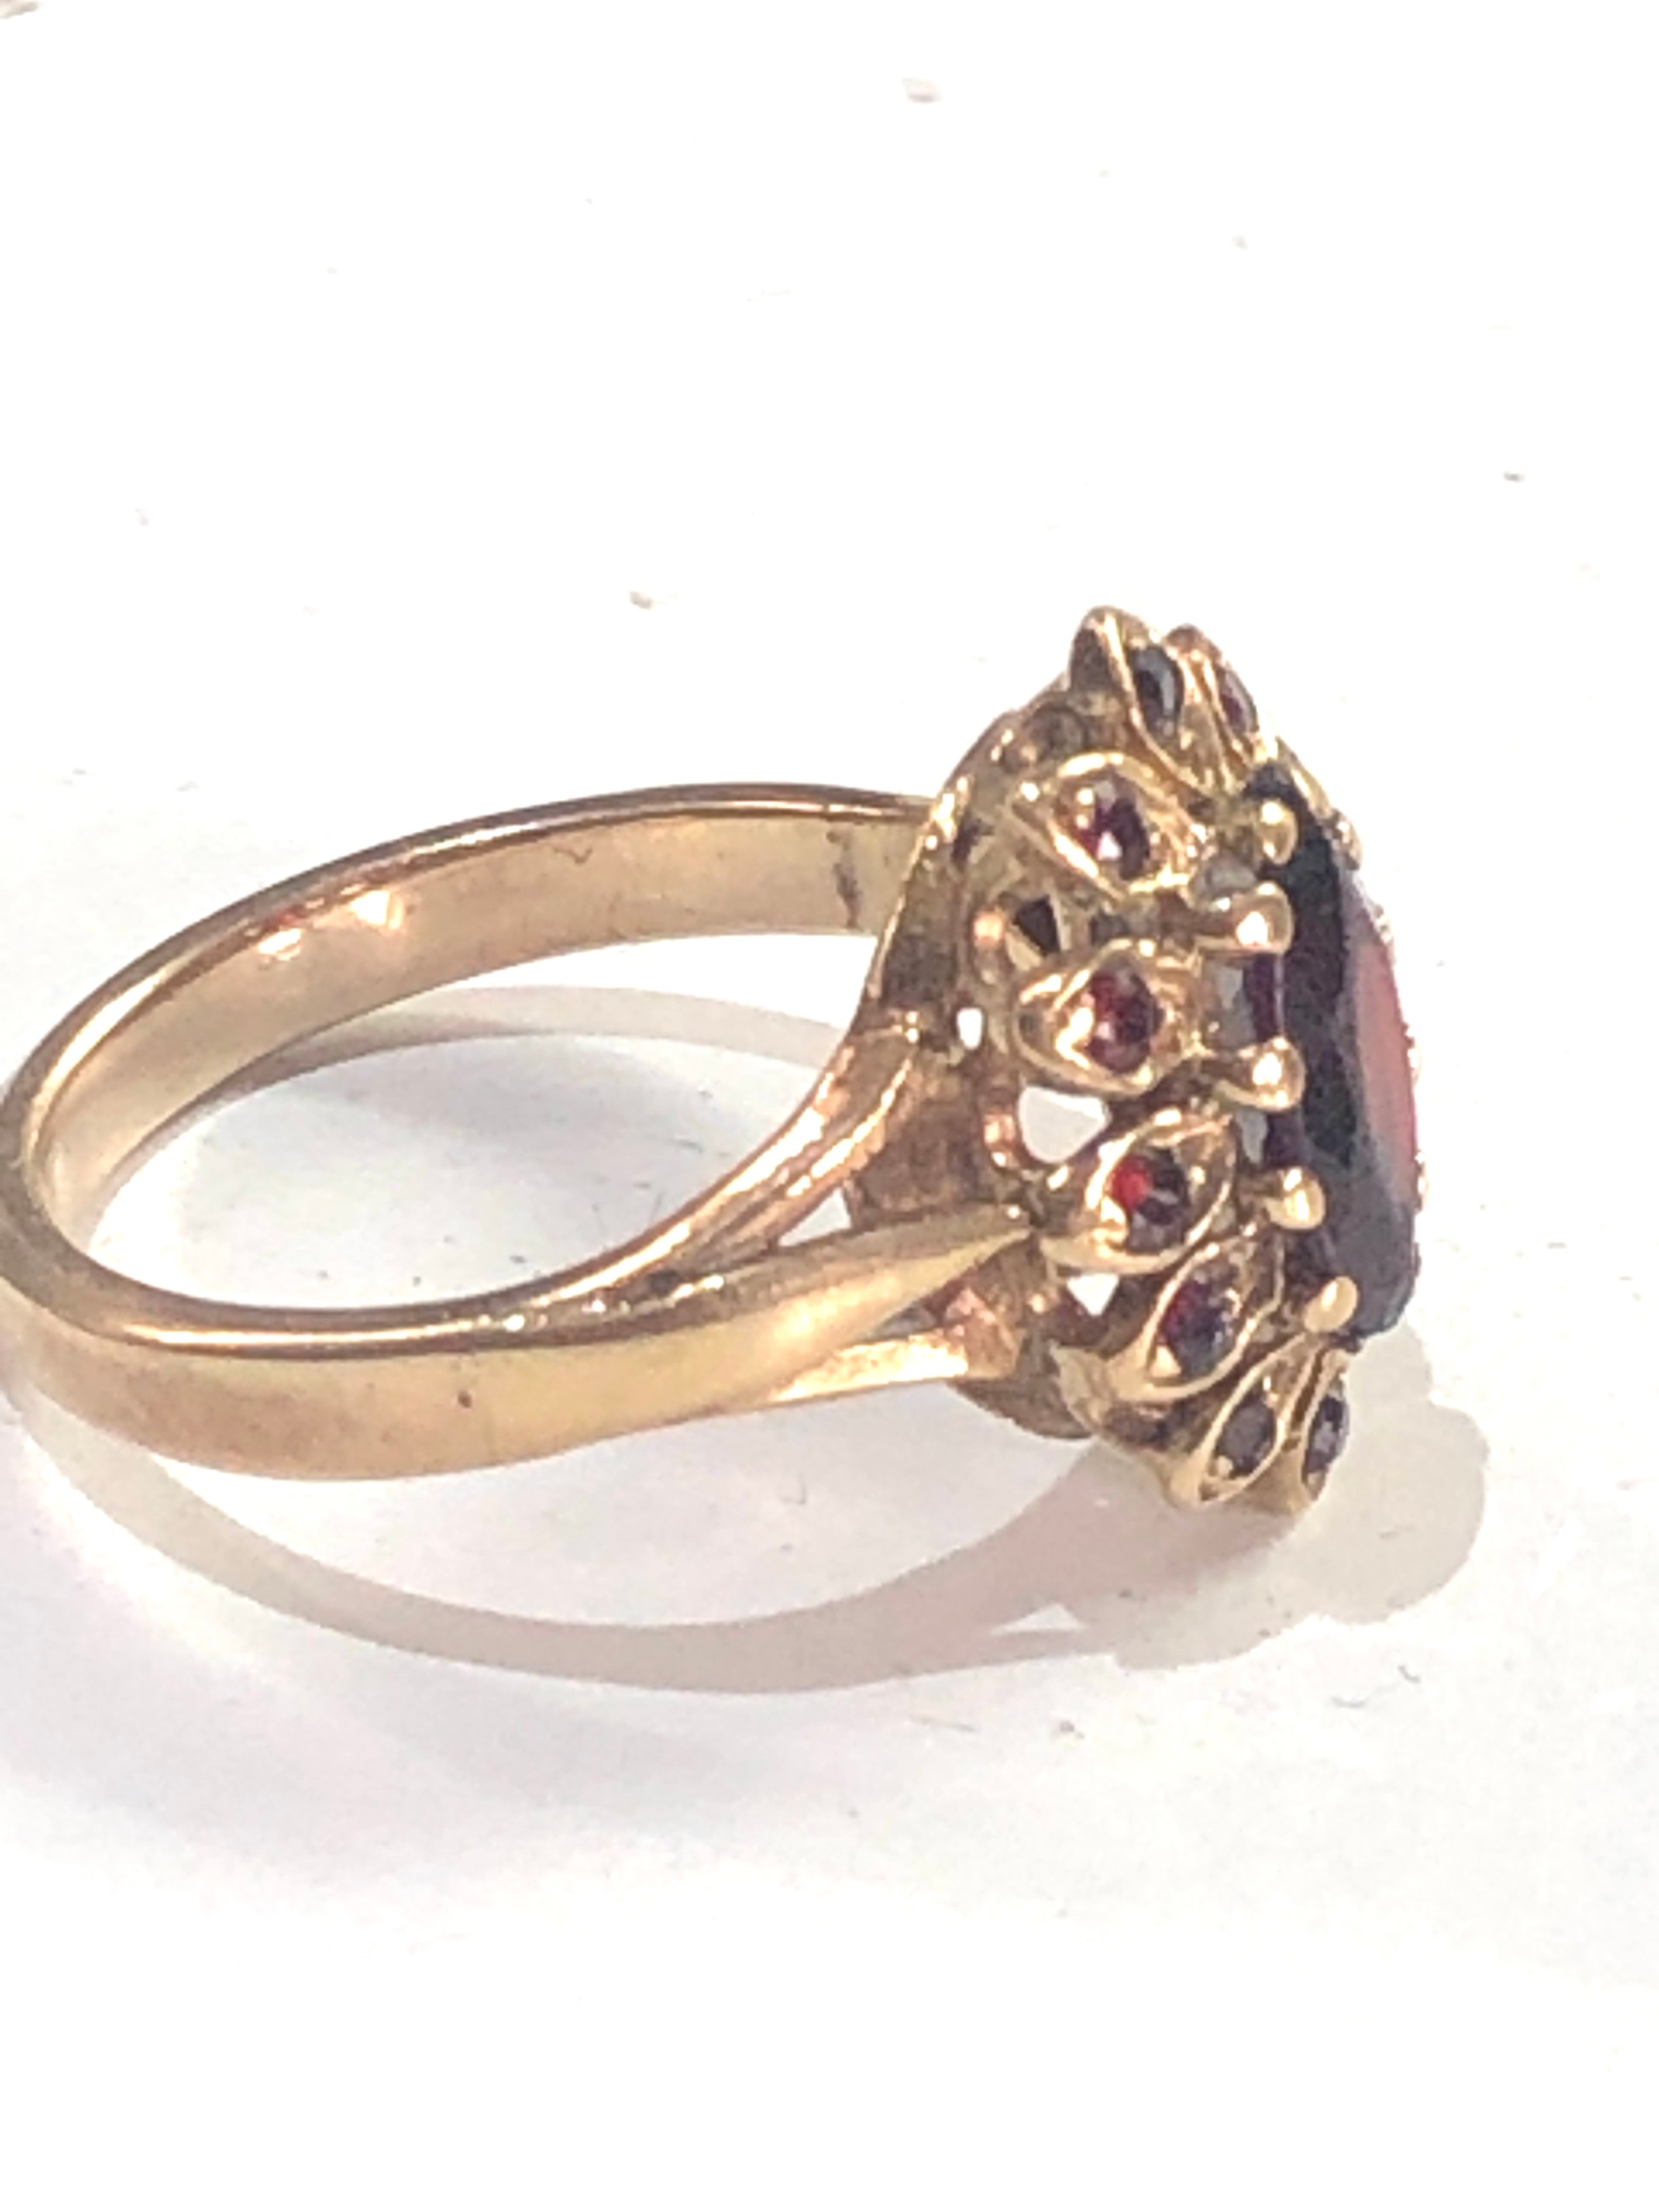 9ct gold garnet ring weight 3.5g chip and wear to garnets - Image 3 of 3